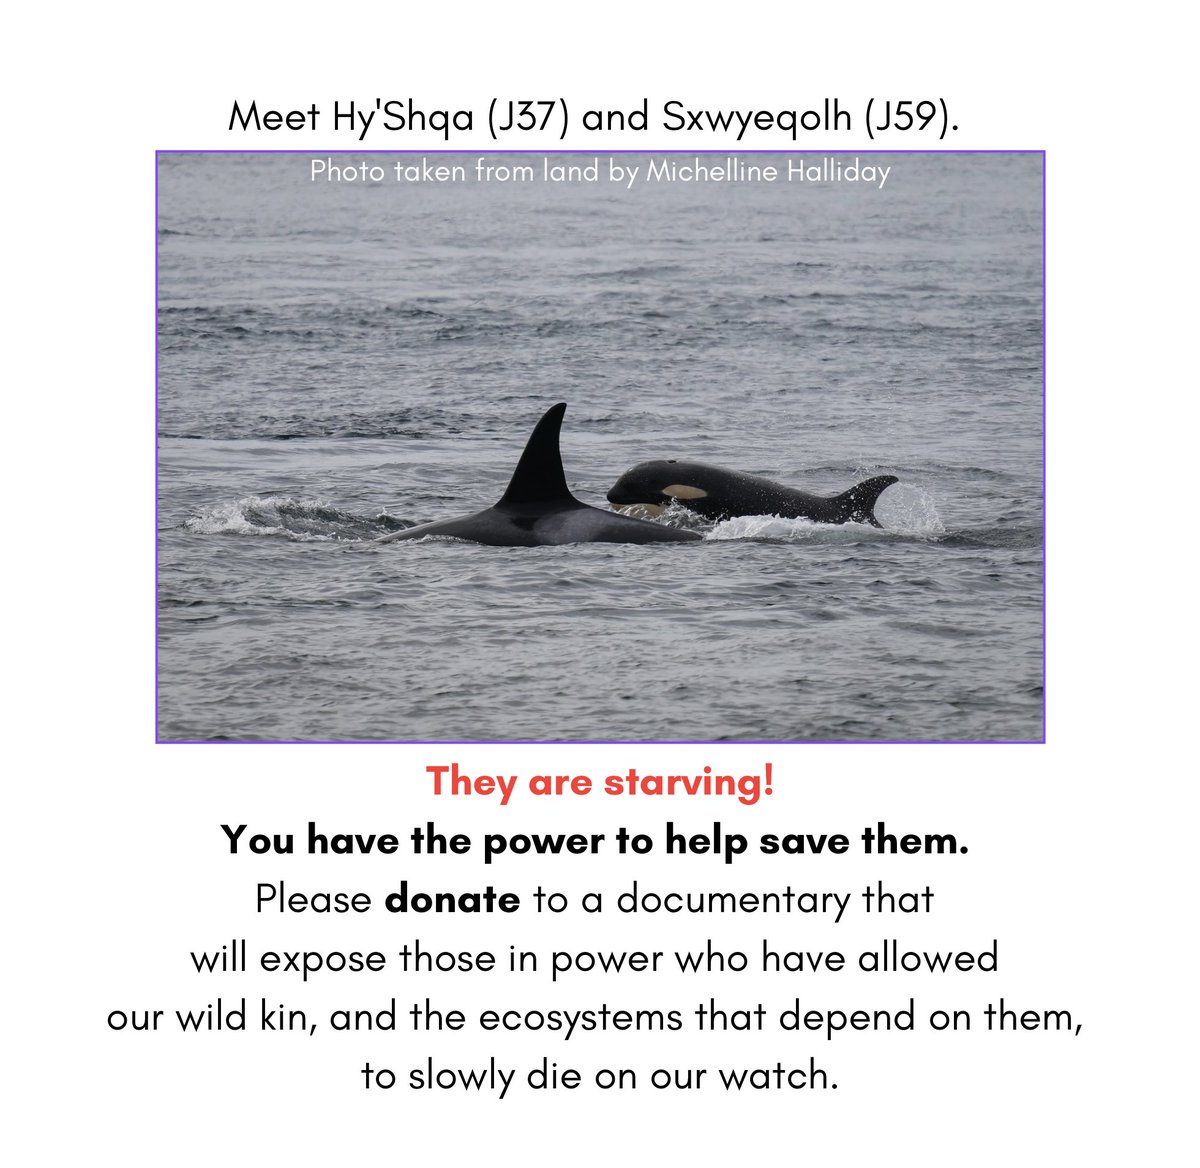 Please help us get this documentary funded by donating, and sharing our post! damtruth.org/take-action #FreetheSnake #SalishSeaOrcas #RightsofNature #AnimalRights @FeelGoodAction @patagonia @whalesorg @LewisPugh @theoceanrace @MissionBlue @Salishorcas @wawildlifefirst @narntweet